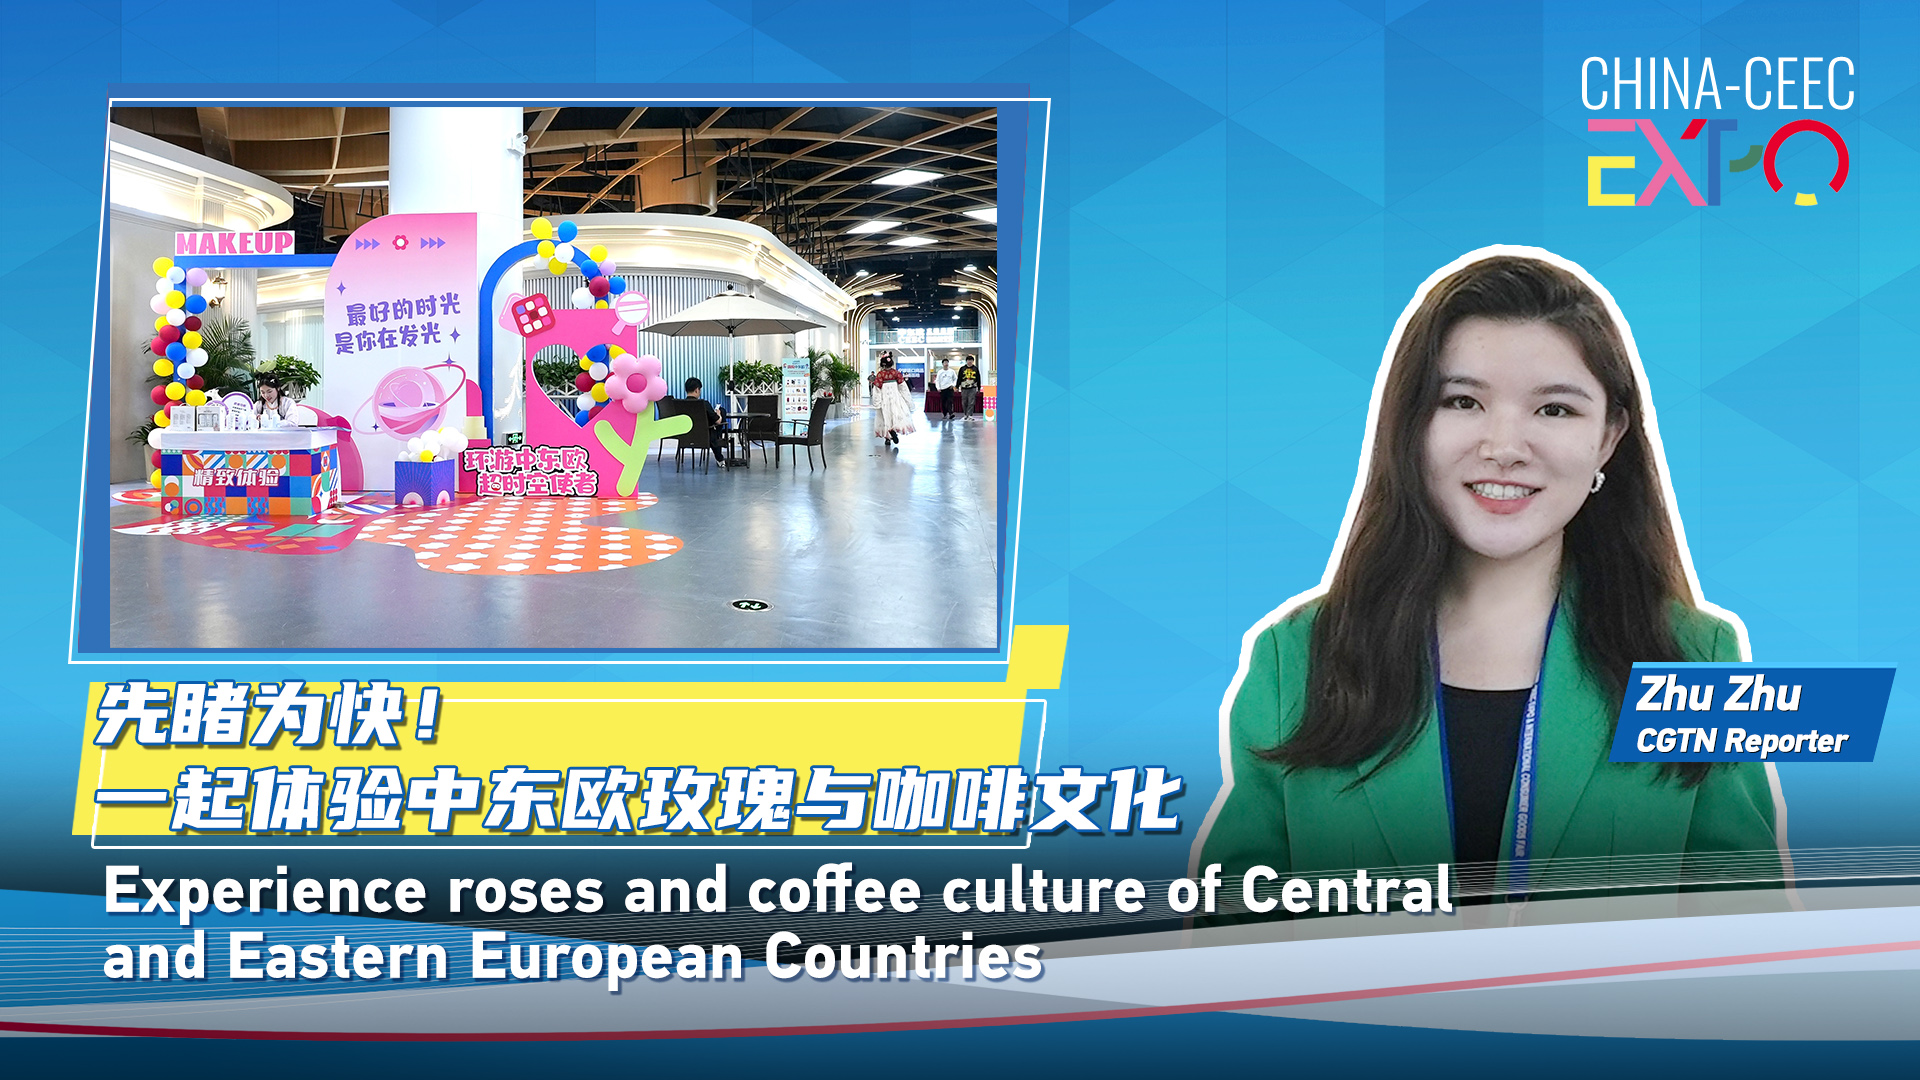 Live: Experience roses and coffee culture of Central and Eastern European Countries